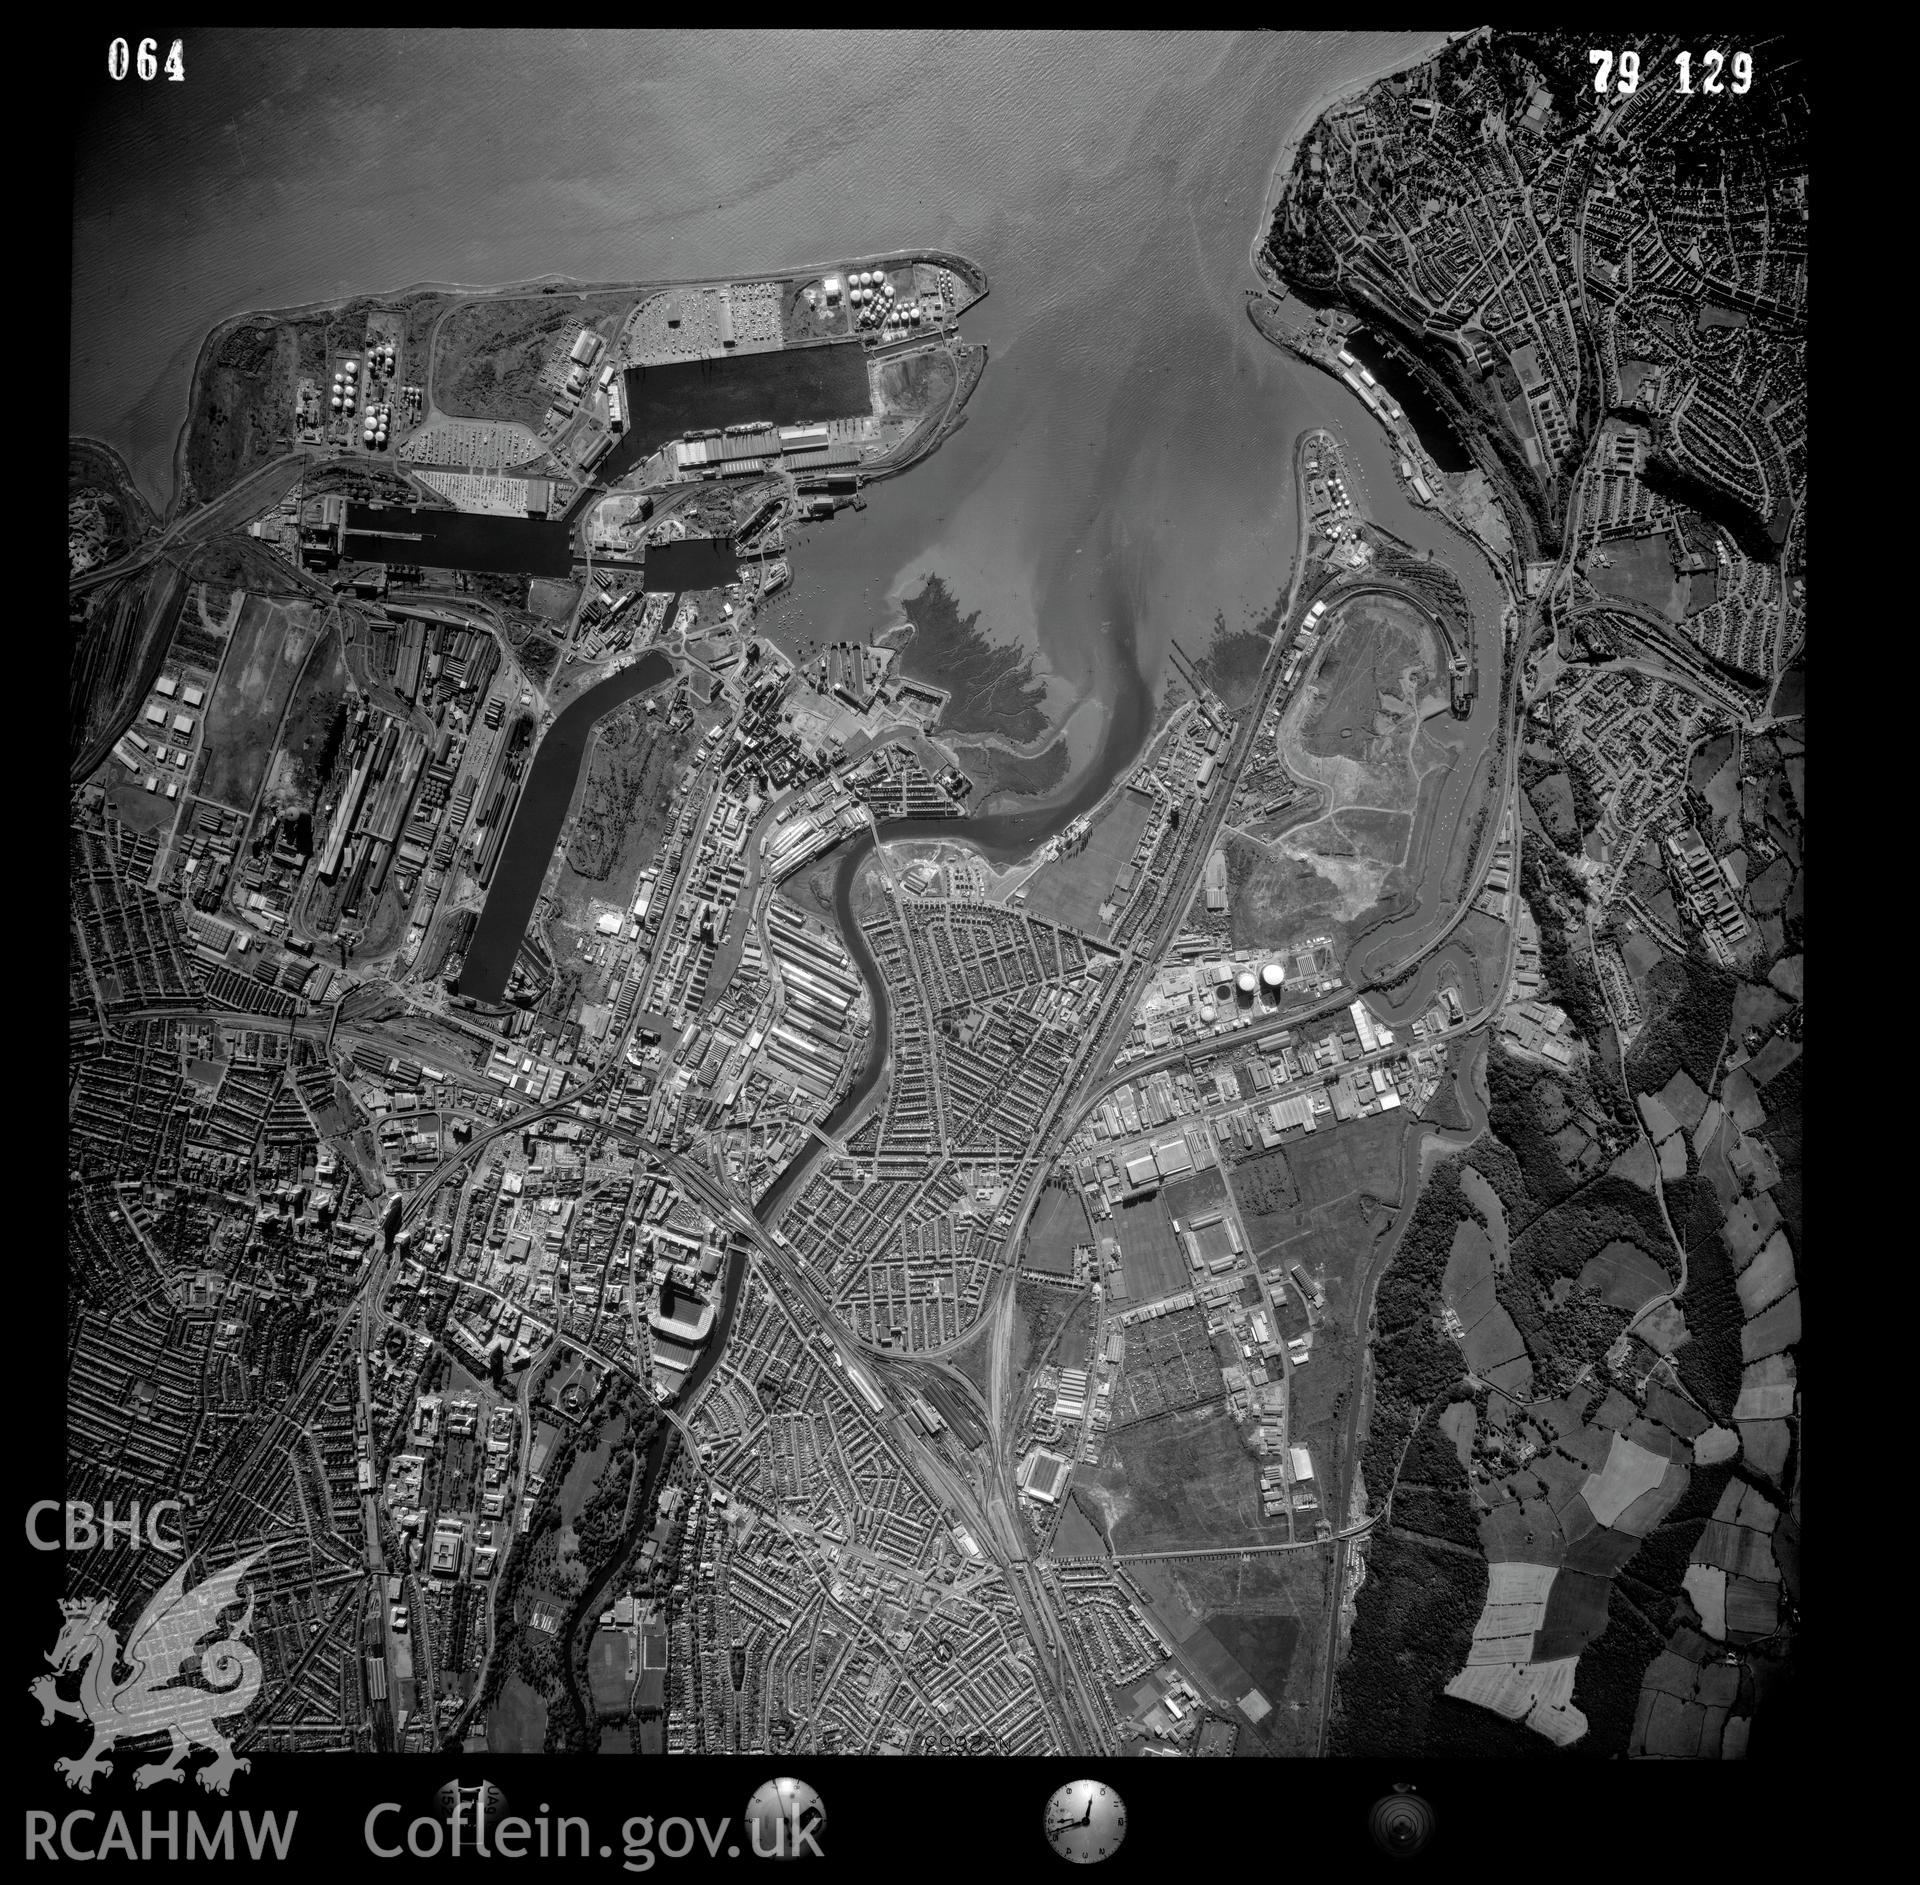 Digital copy of an aerial photograph showing the Cardiff Bay area, taken by Ordnance Survey, 1979.